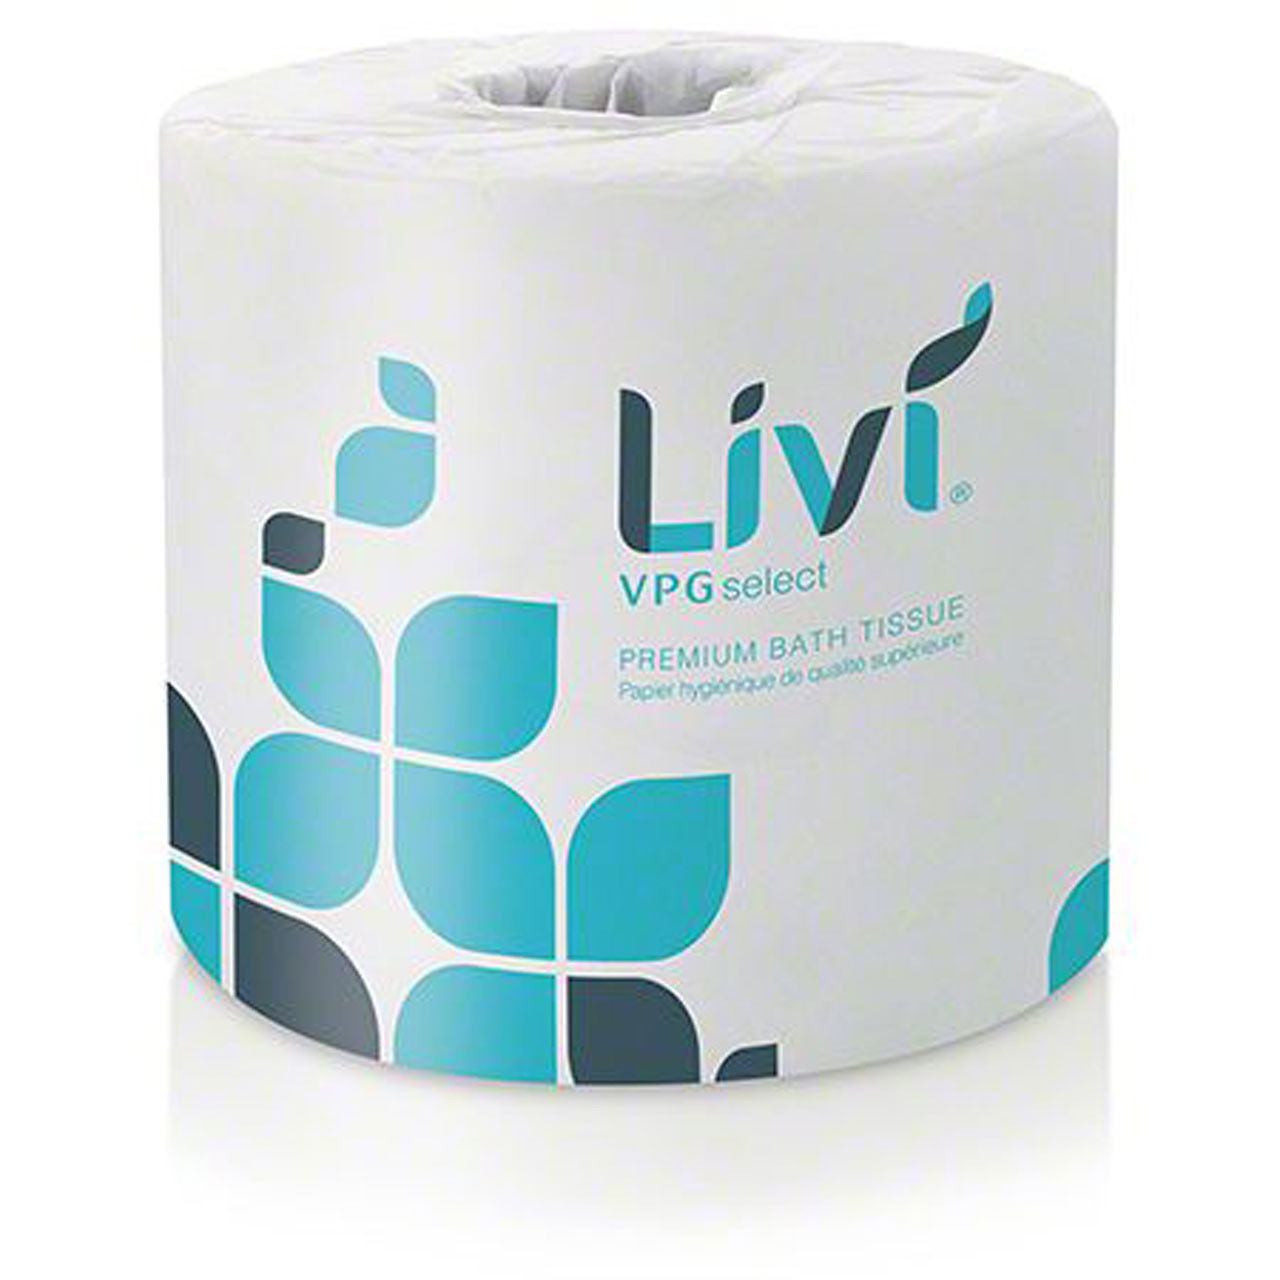 How many plies does the Solaris Paper Livi VPG Select Toilet Tissue have?